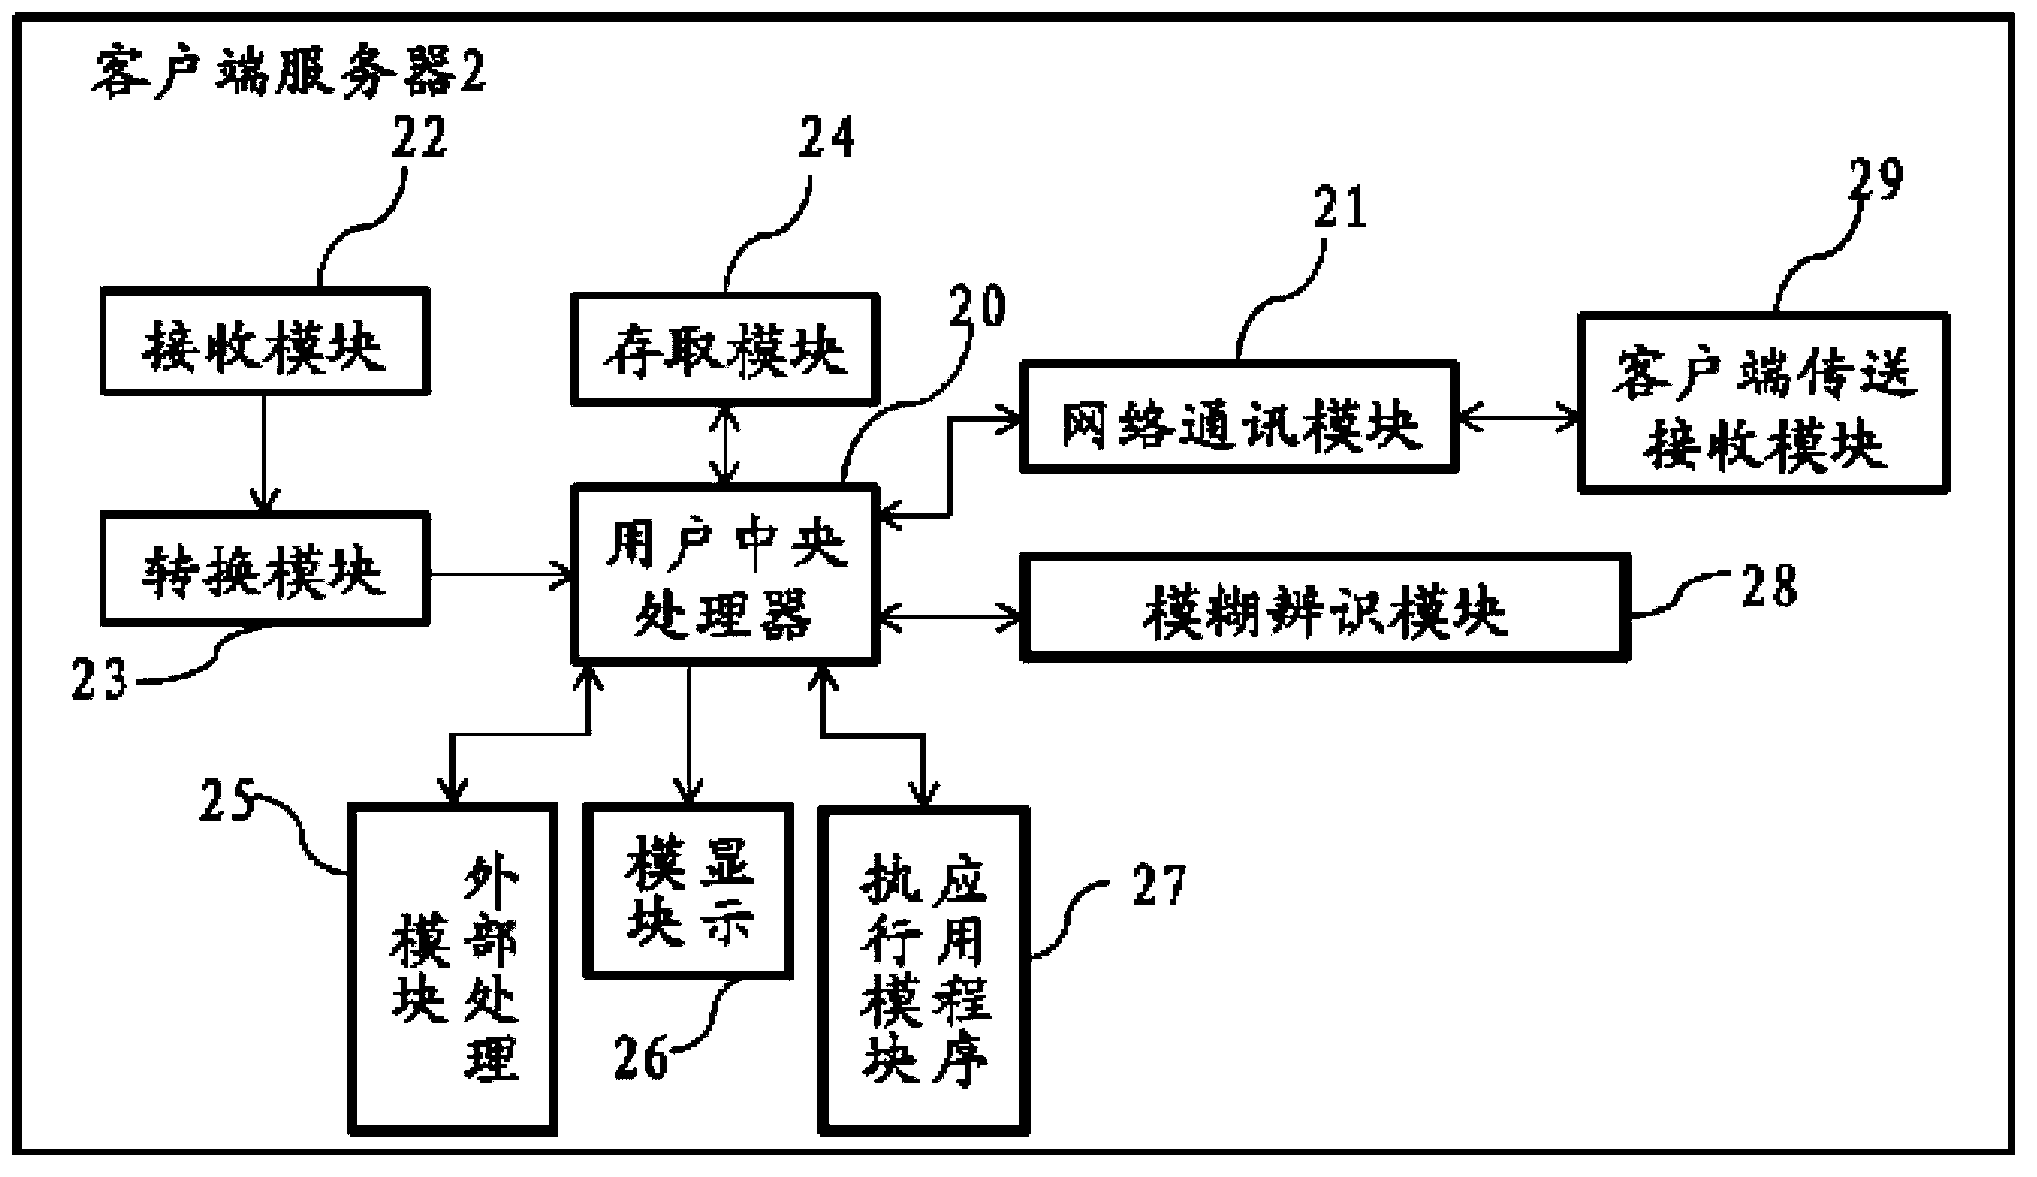 Voice controllable song-on-demand system and operating process thereof